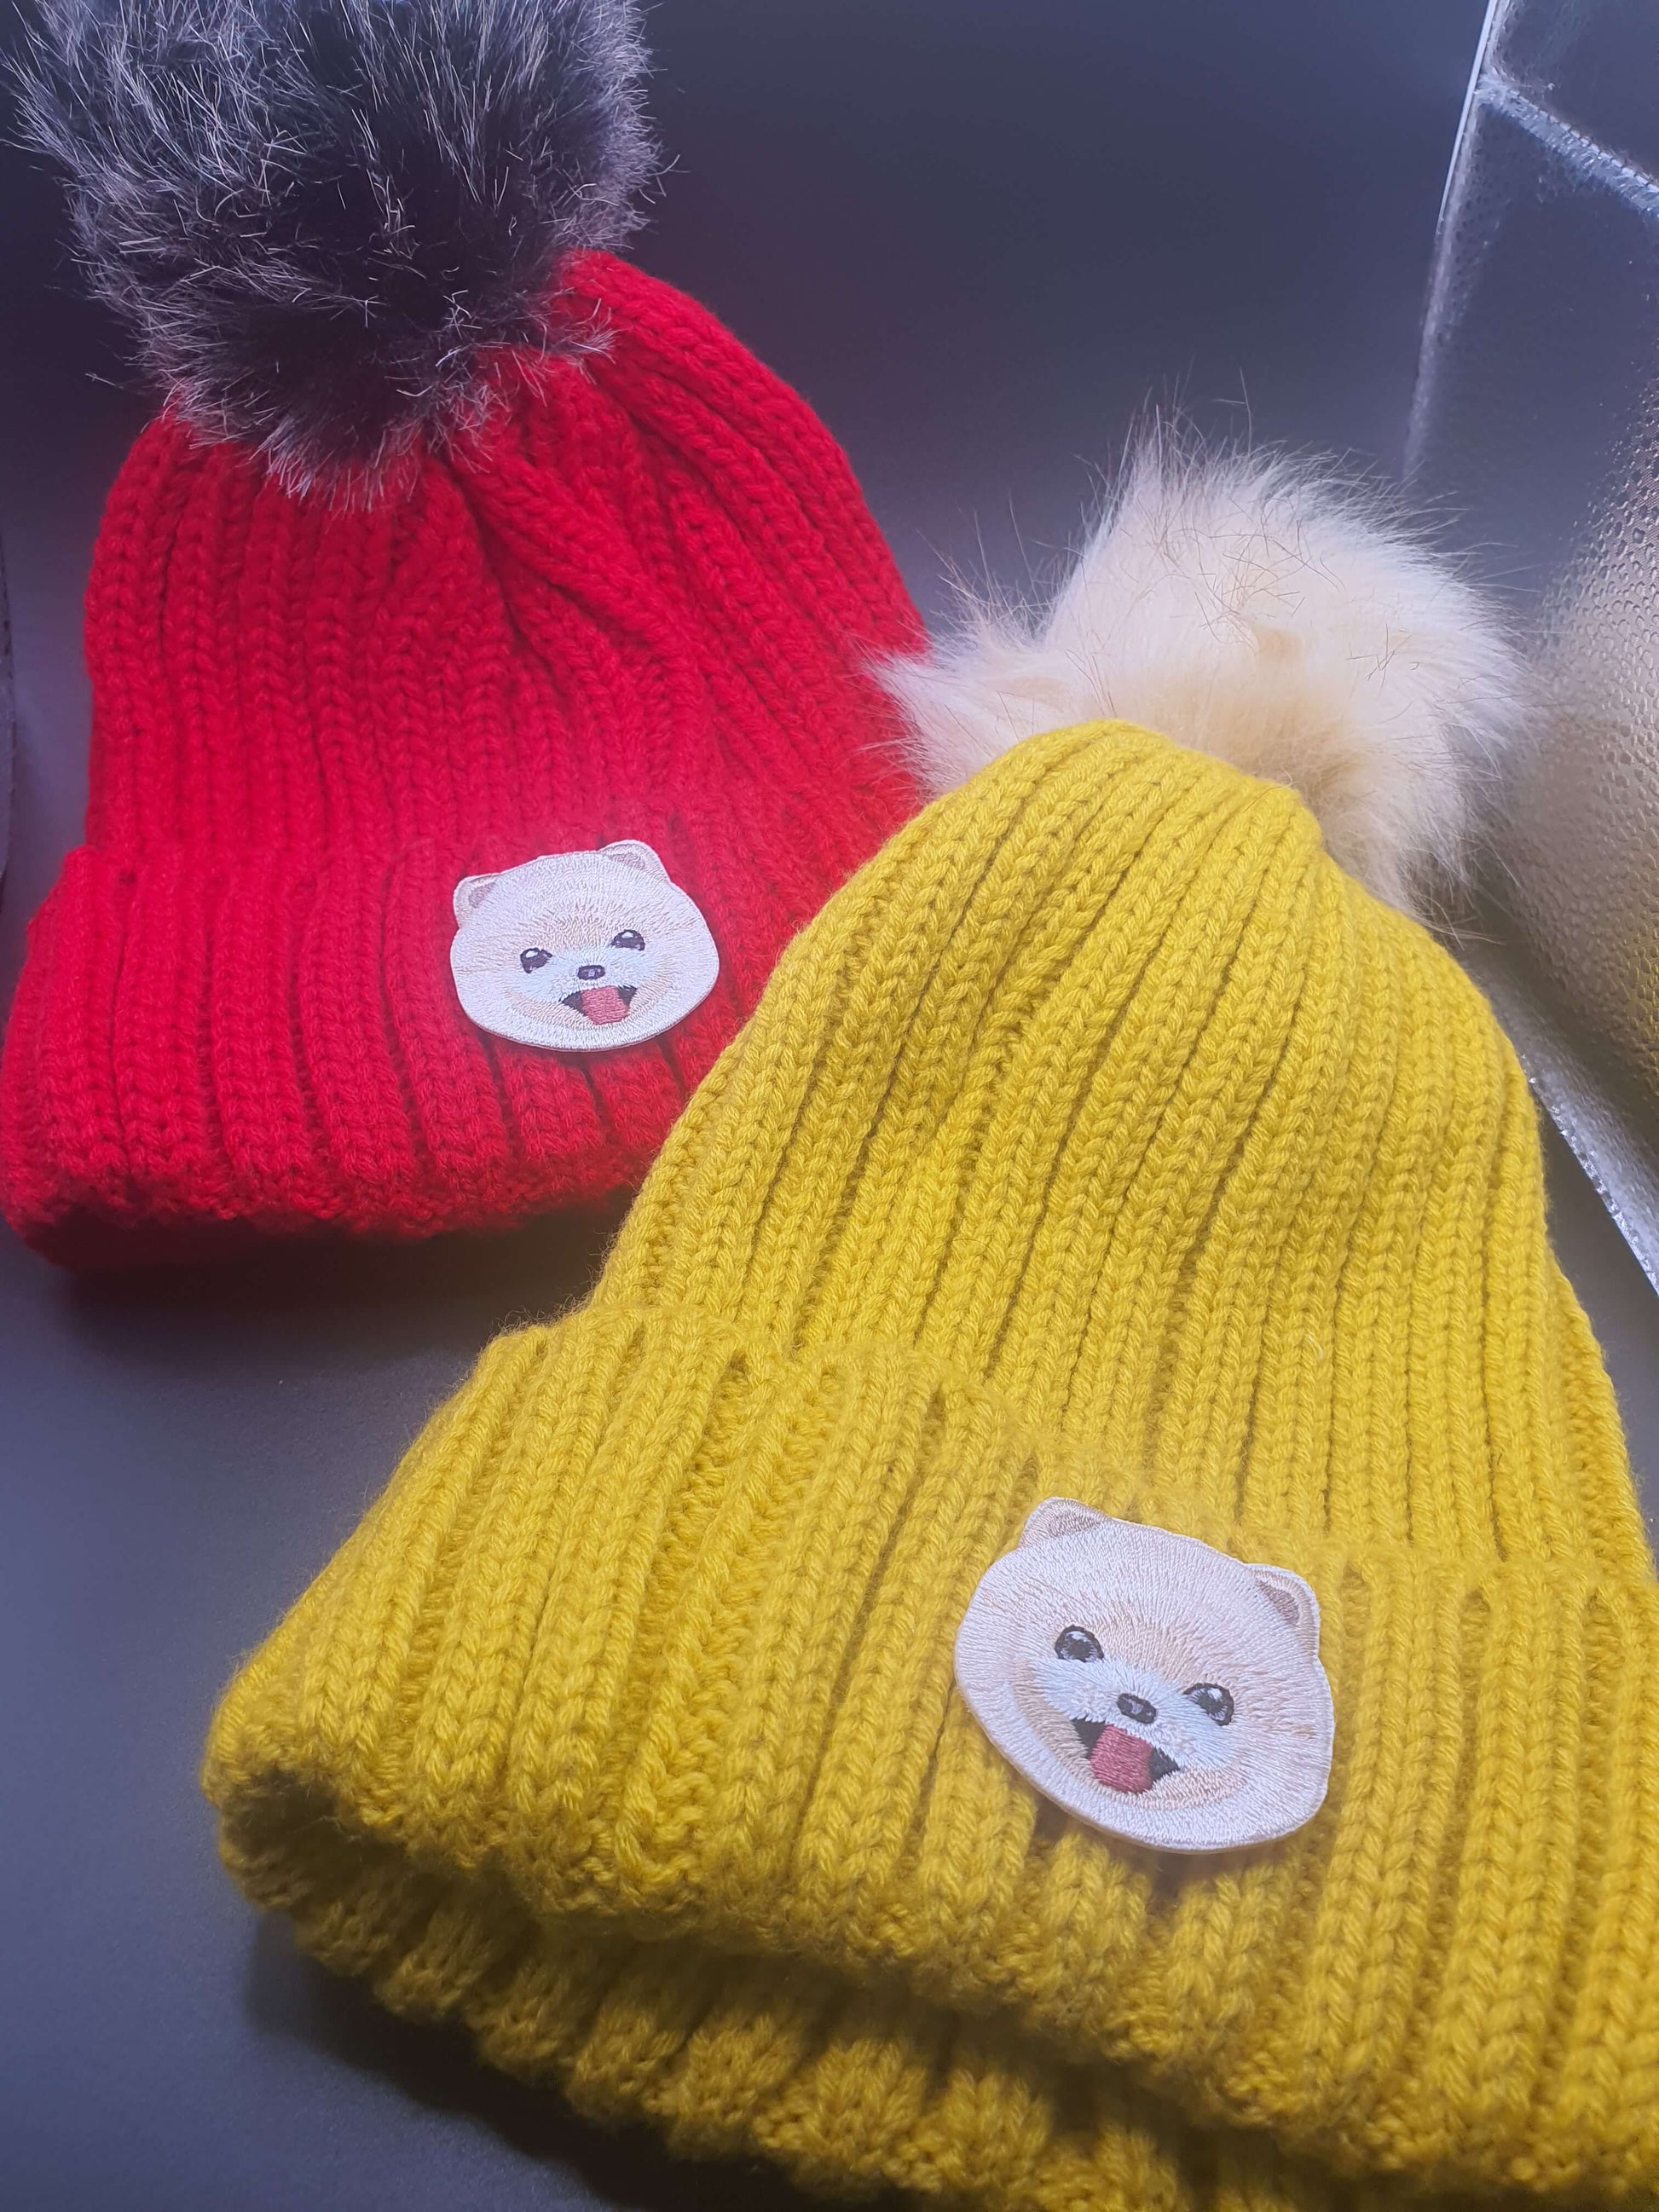 Dog Themed Knitted Beanies - Style's Bug Pomeranian / Both (25% OFF)